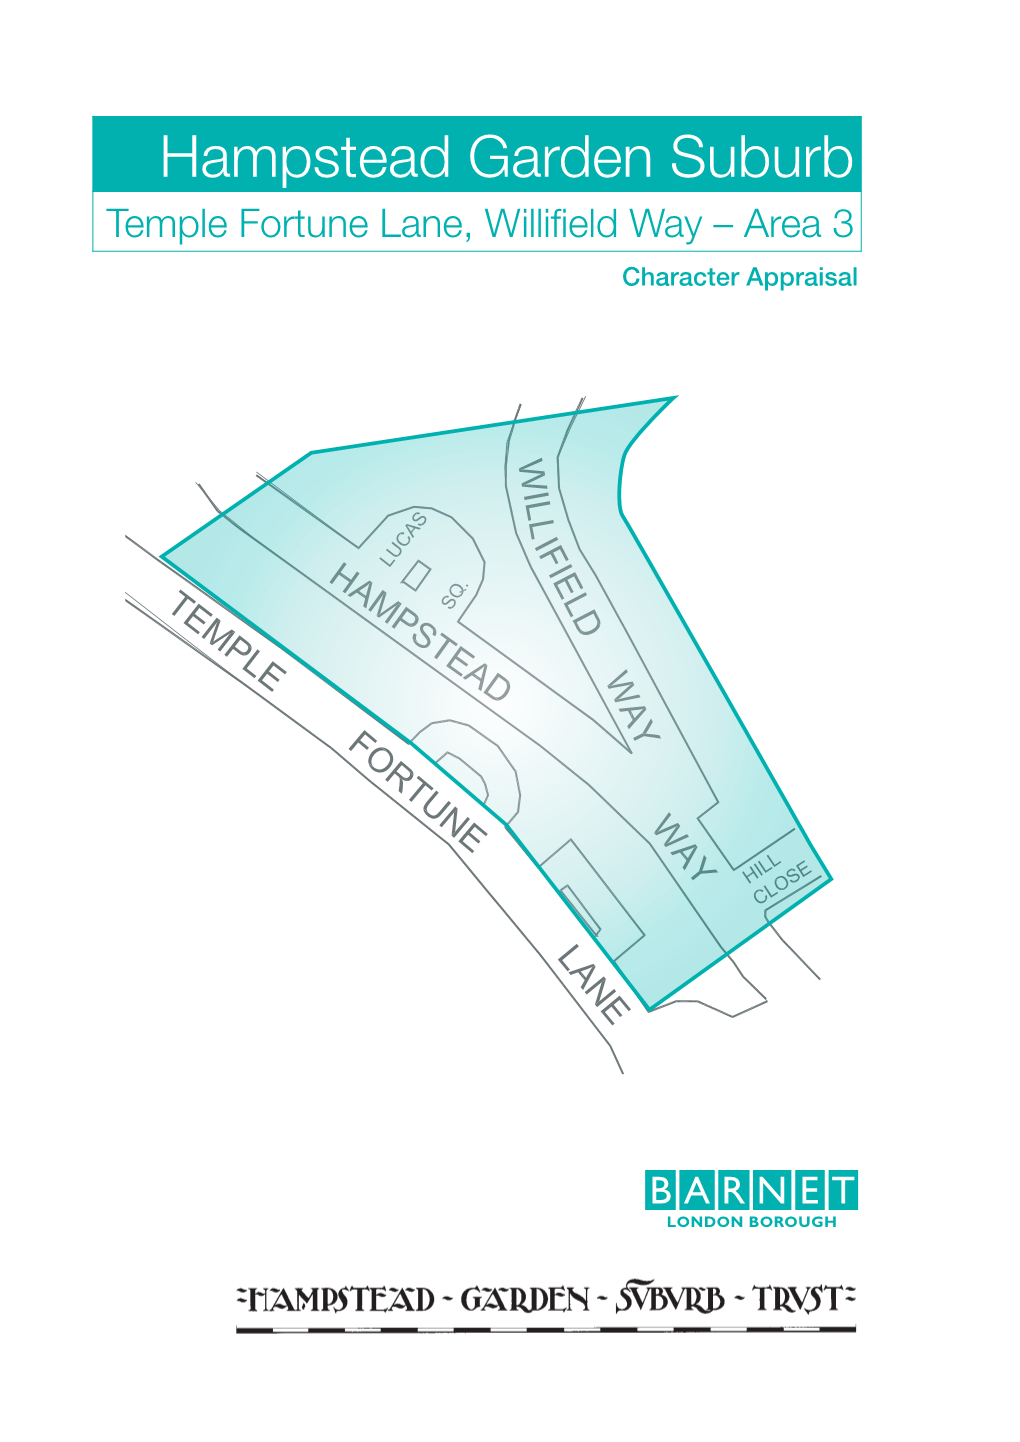 Temple Fortune Lane, Willifield Way – Area 3 Character Appraisal for Further Information on the Contents of This Document Contact